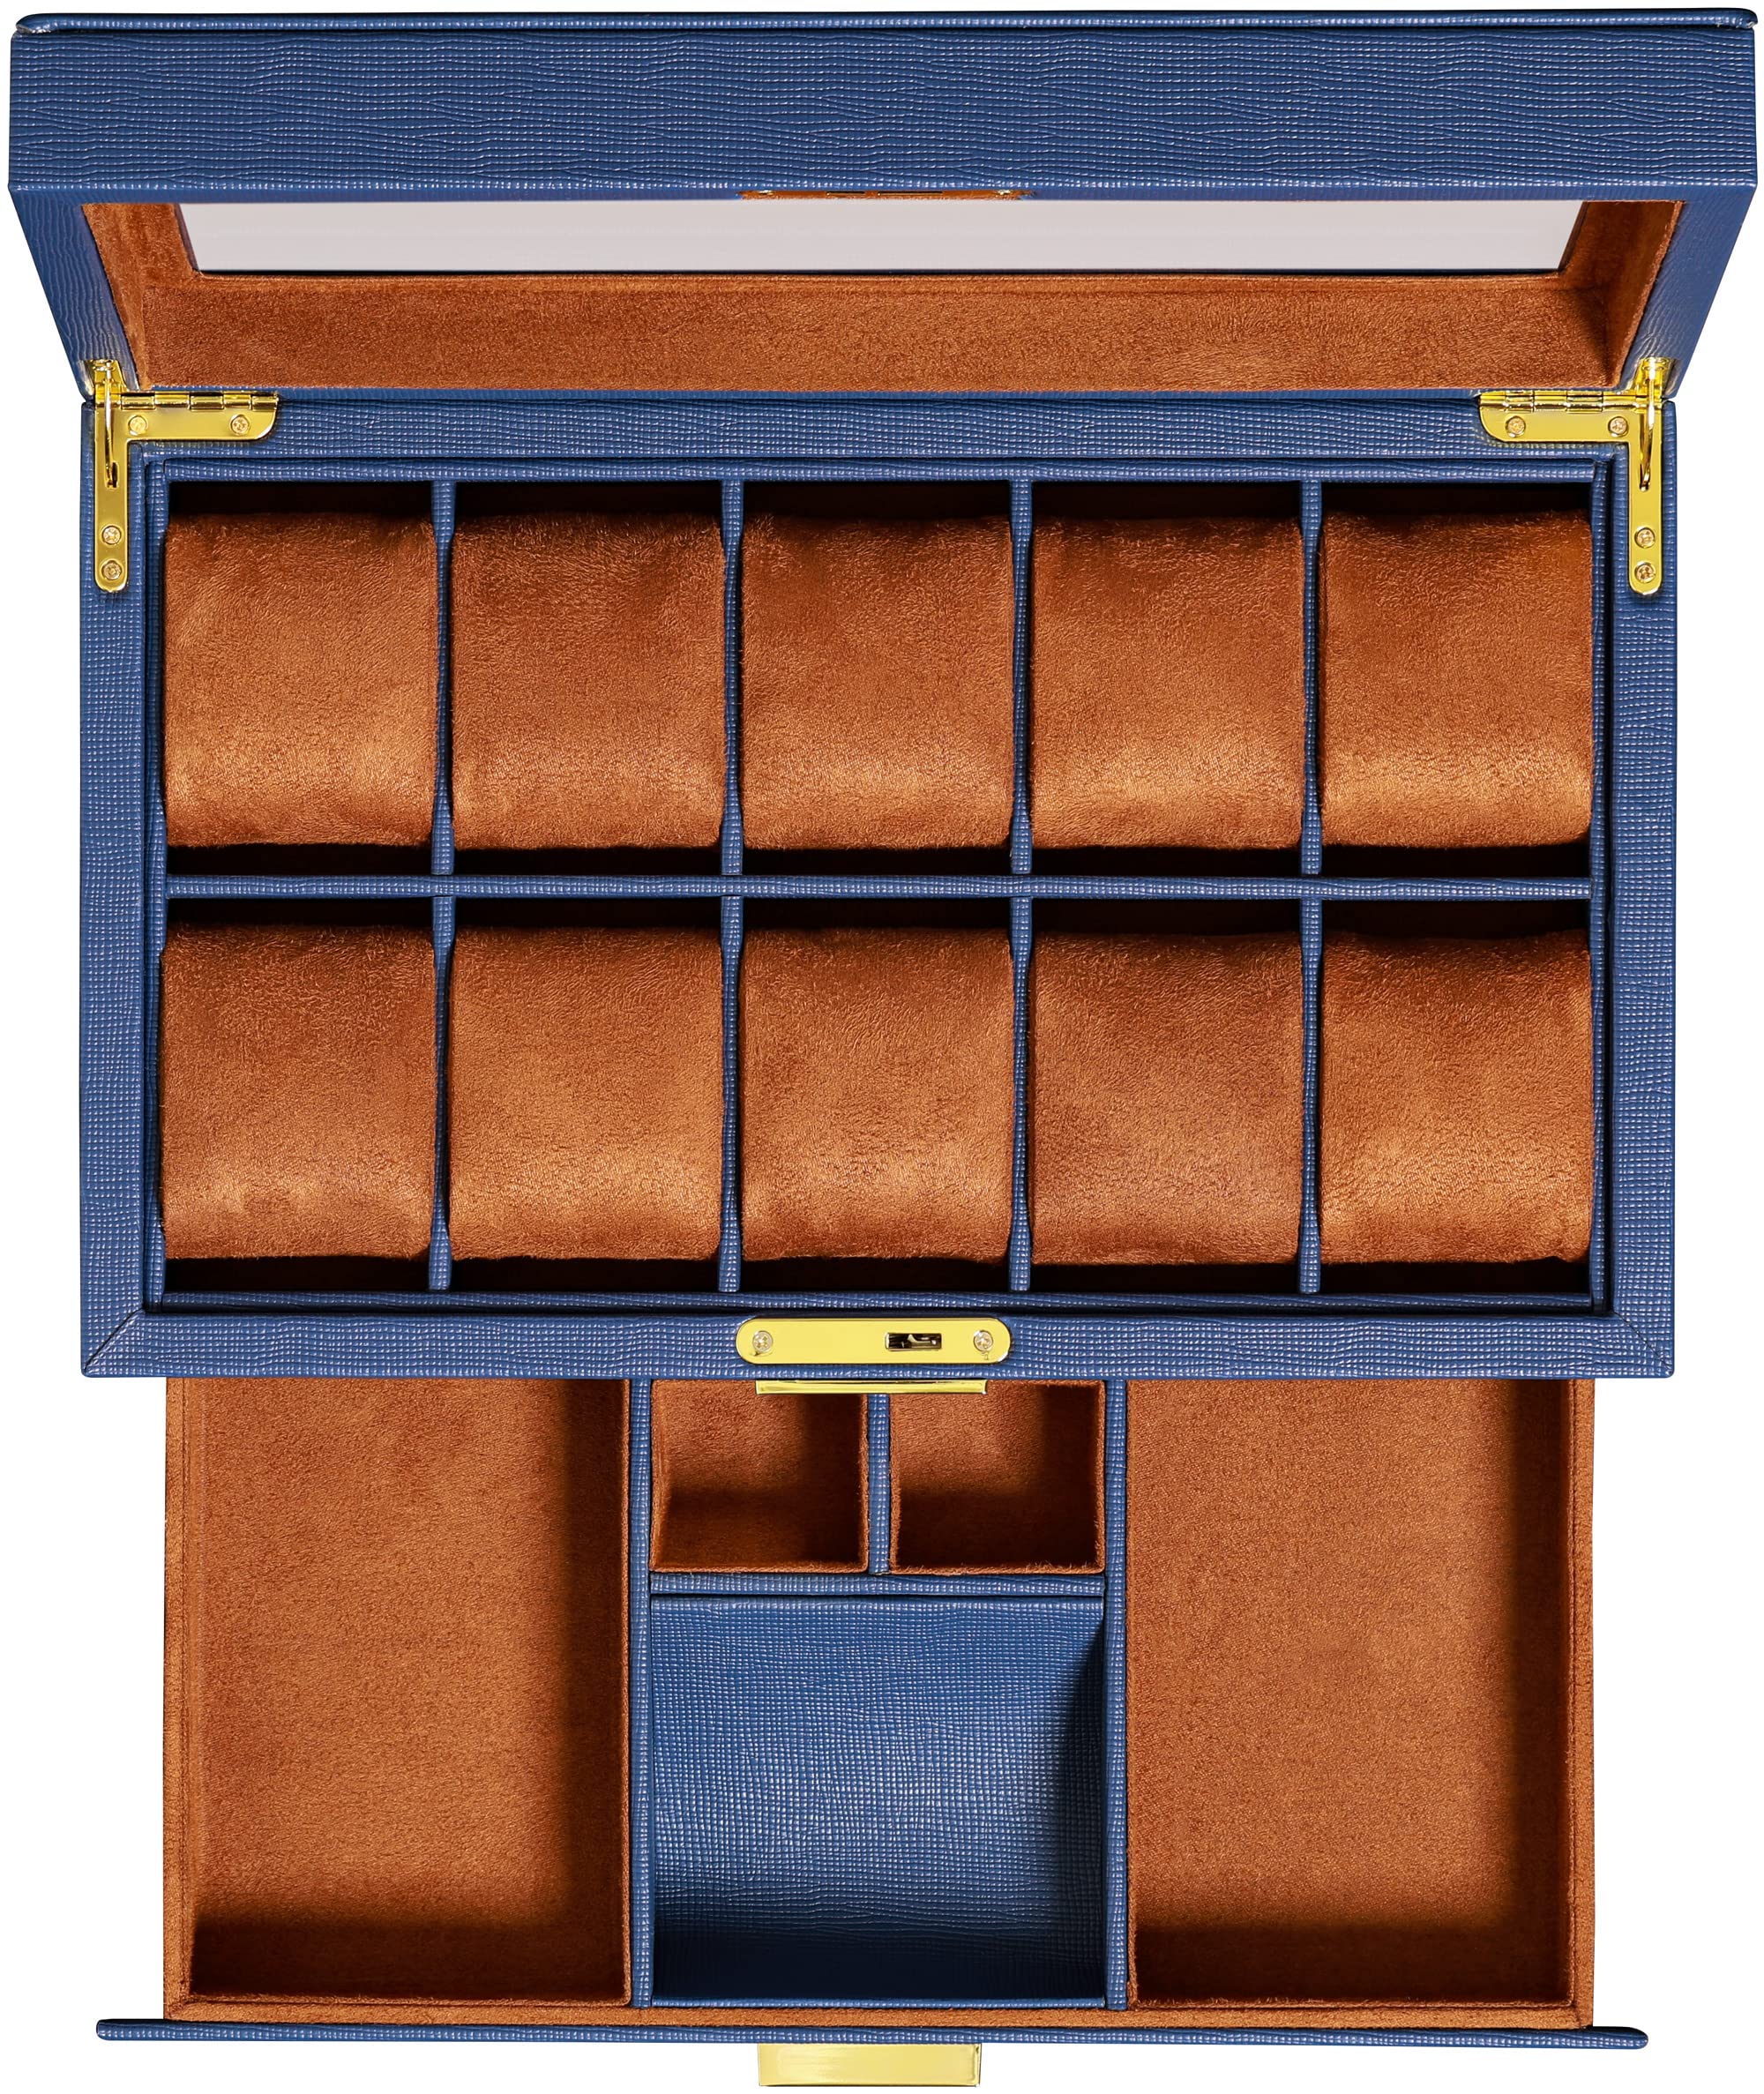 Gift Set 10 Slot Leather Watch Box with Valet Drawer & Matching 5 Watch Travel Case - Luxury Watch Case Display Organizer, Locking Mens Jewelry Watches Holder, Men's Storage Boxes Glass Top Blue/Tan